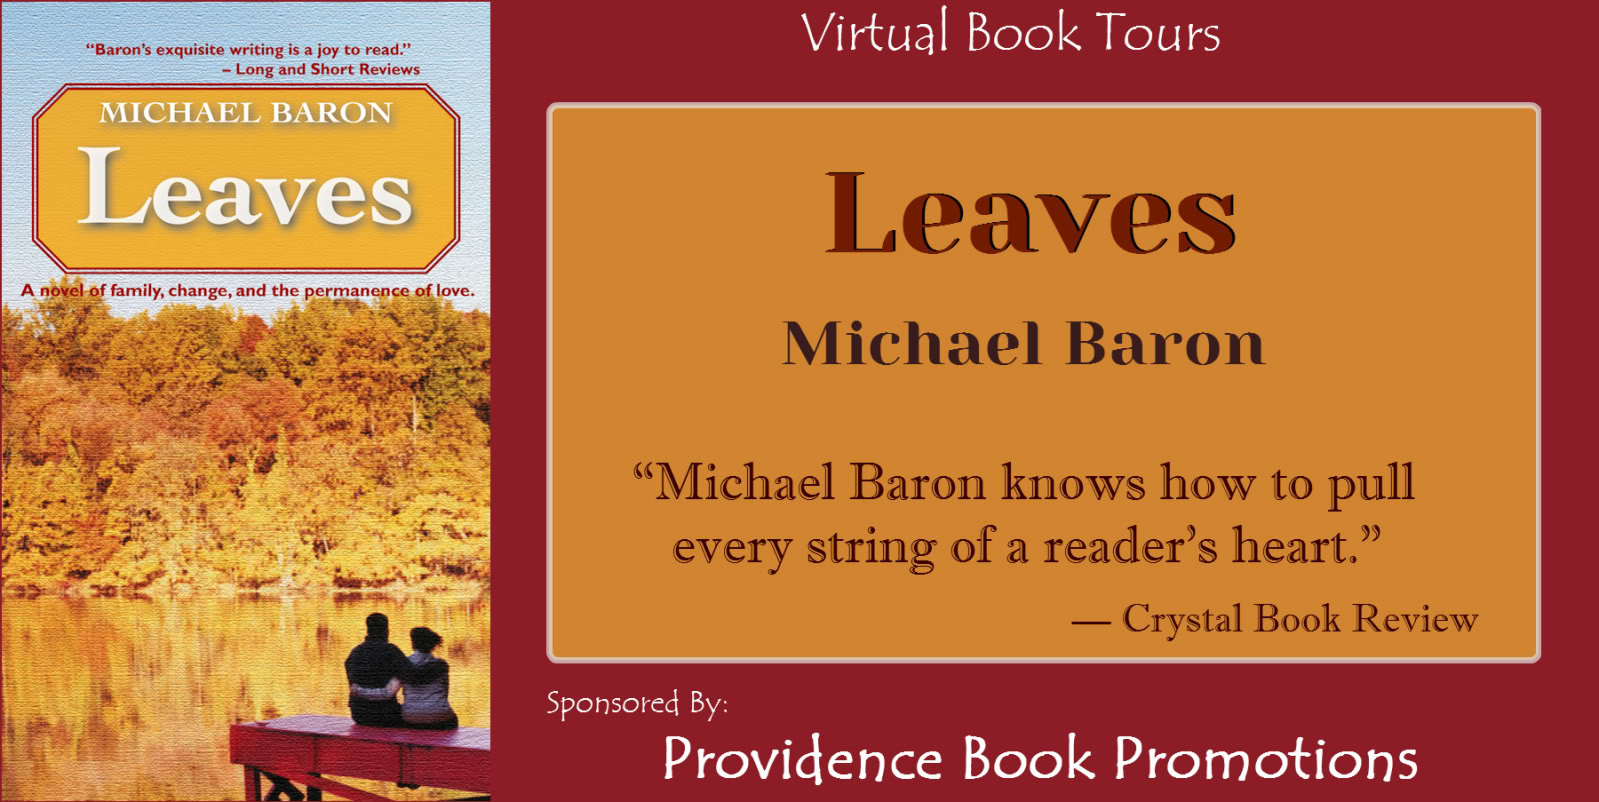 Leaves by Michael Baron on Tour December 2012 – February 2013